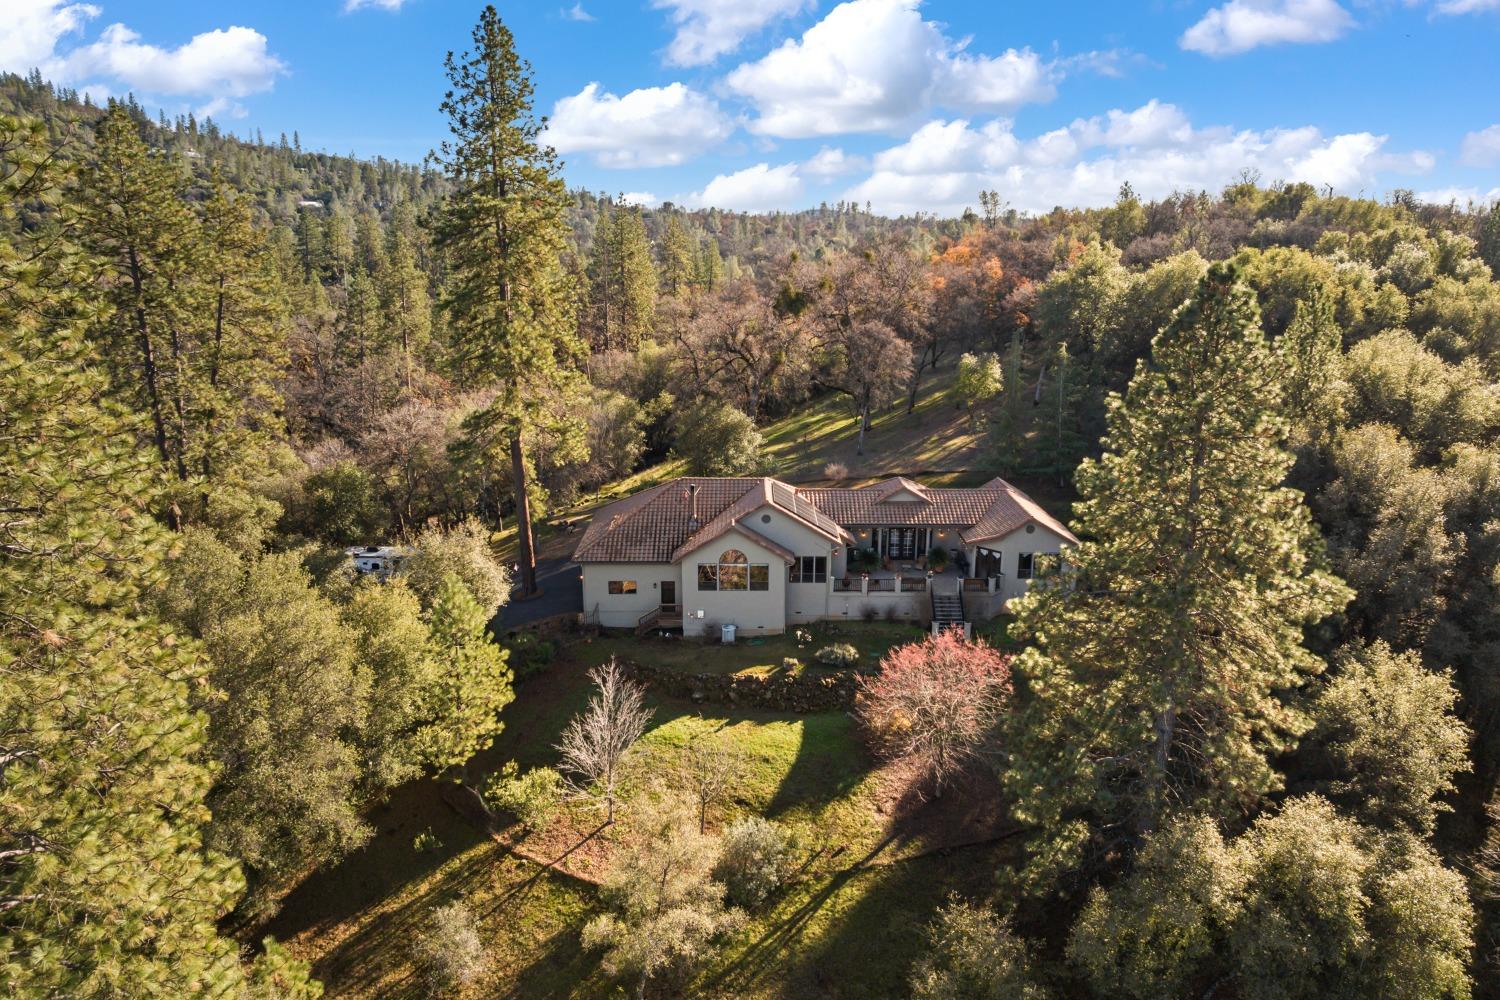 Very private location with spectacular views of the foothills.